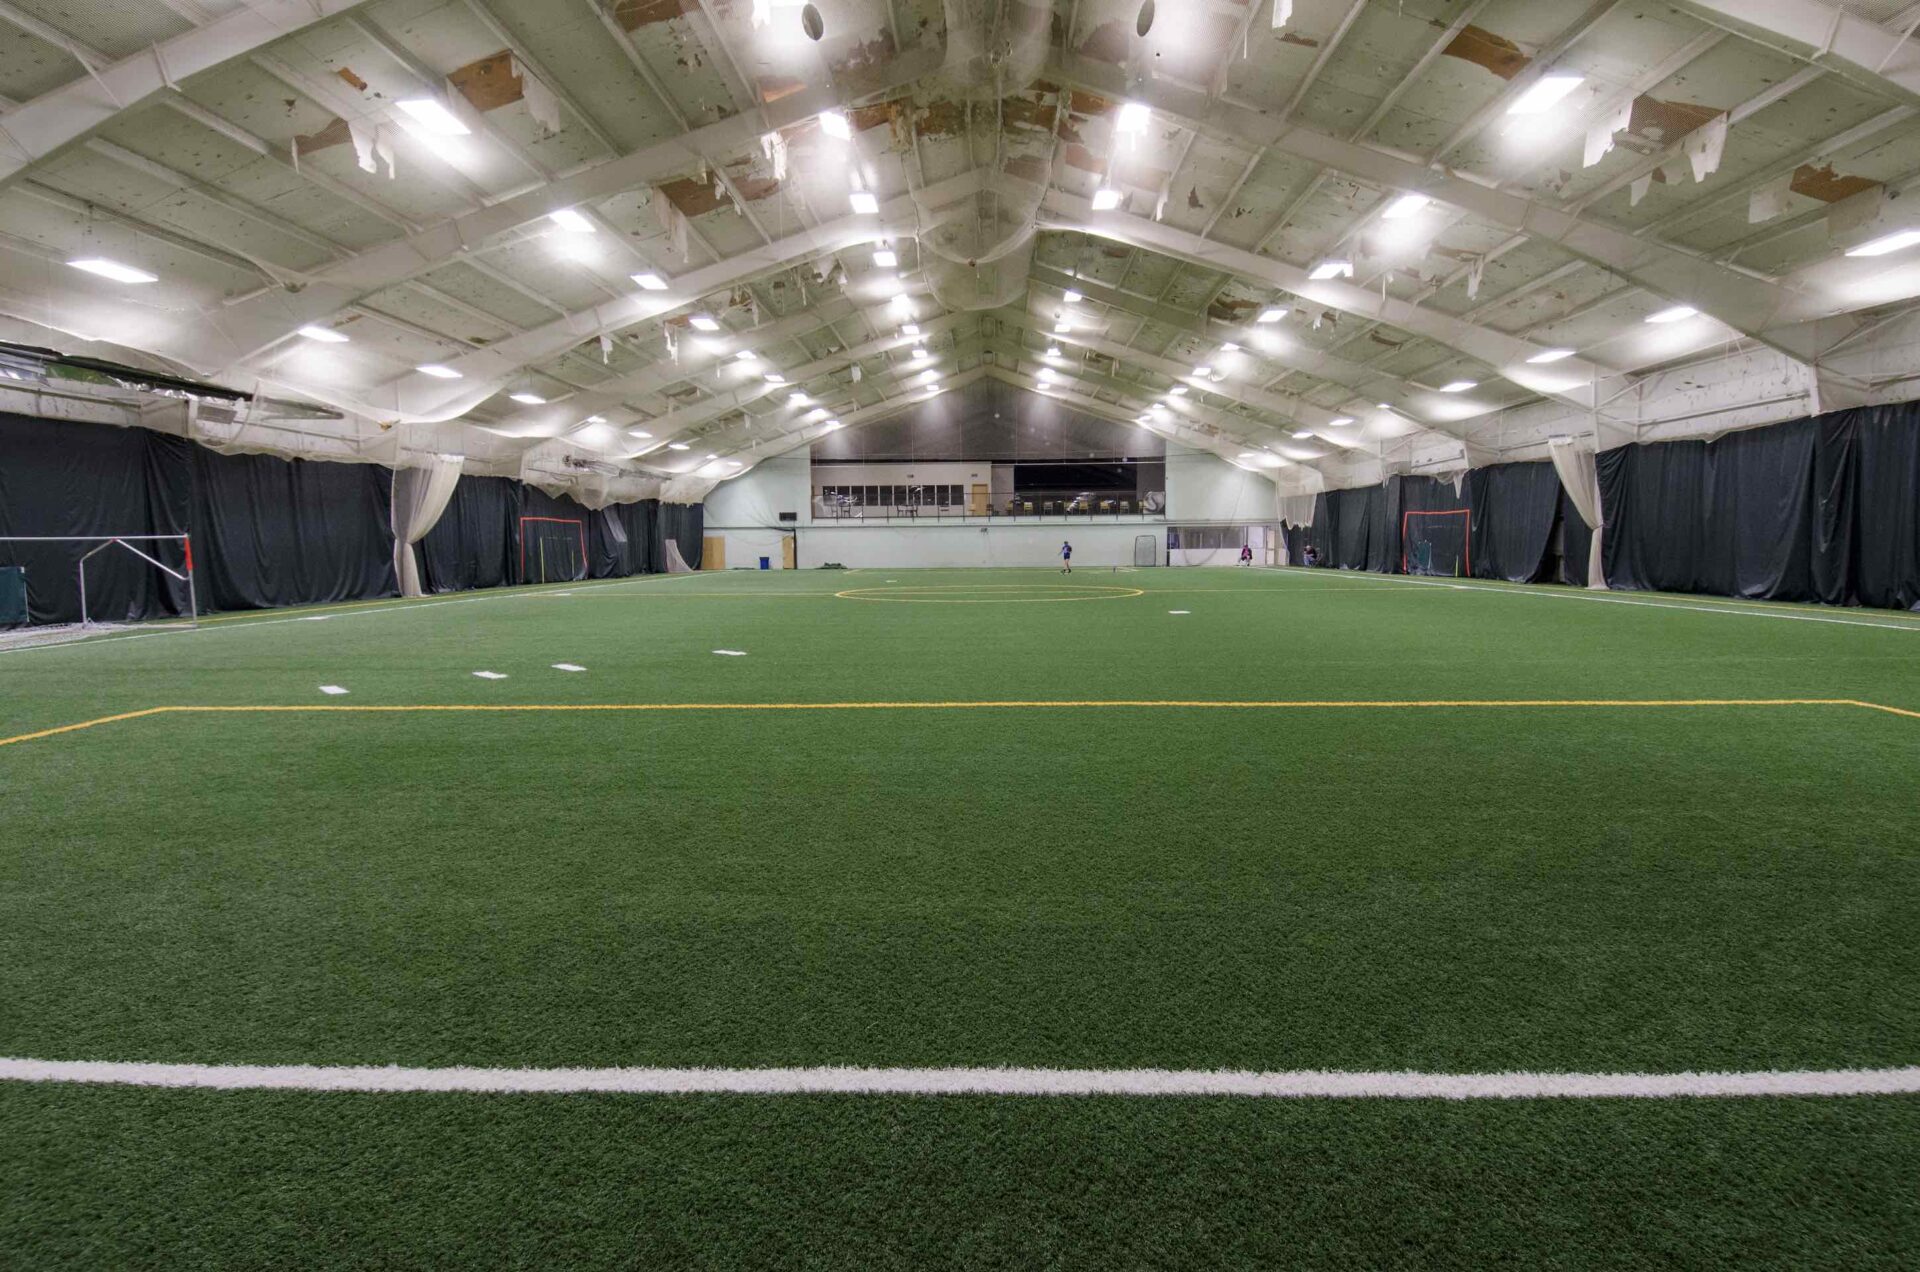 An indoor sports facility with green synthetic turf, white and yellow markings, a person running, and ceiling-mounted lights illuminating the space.